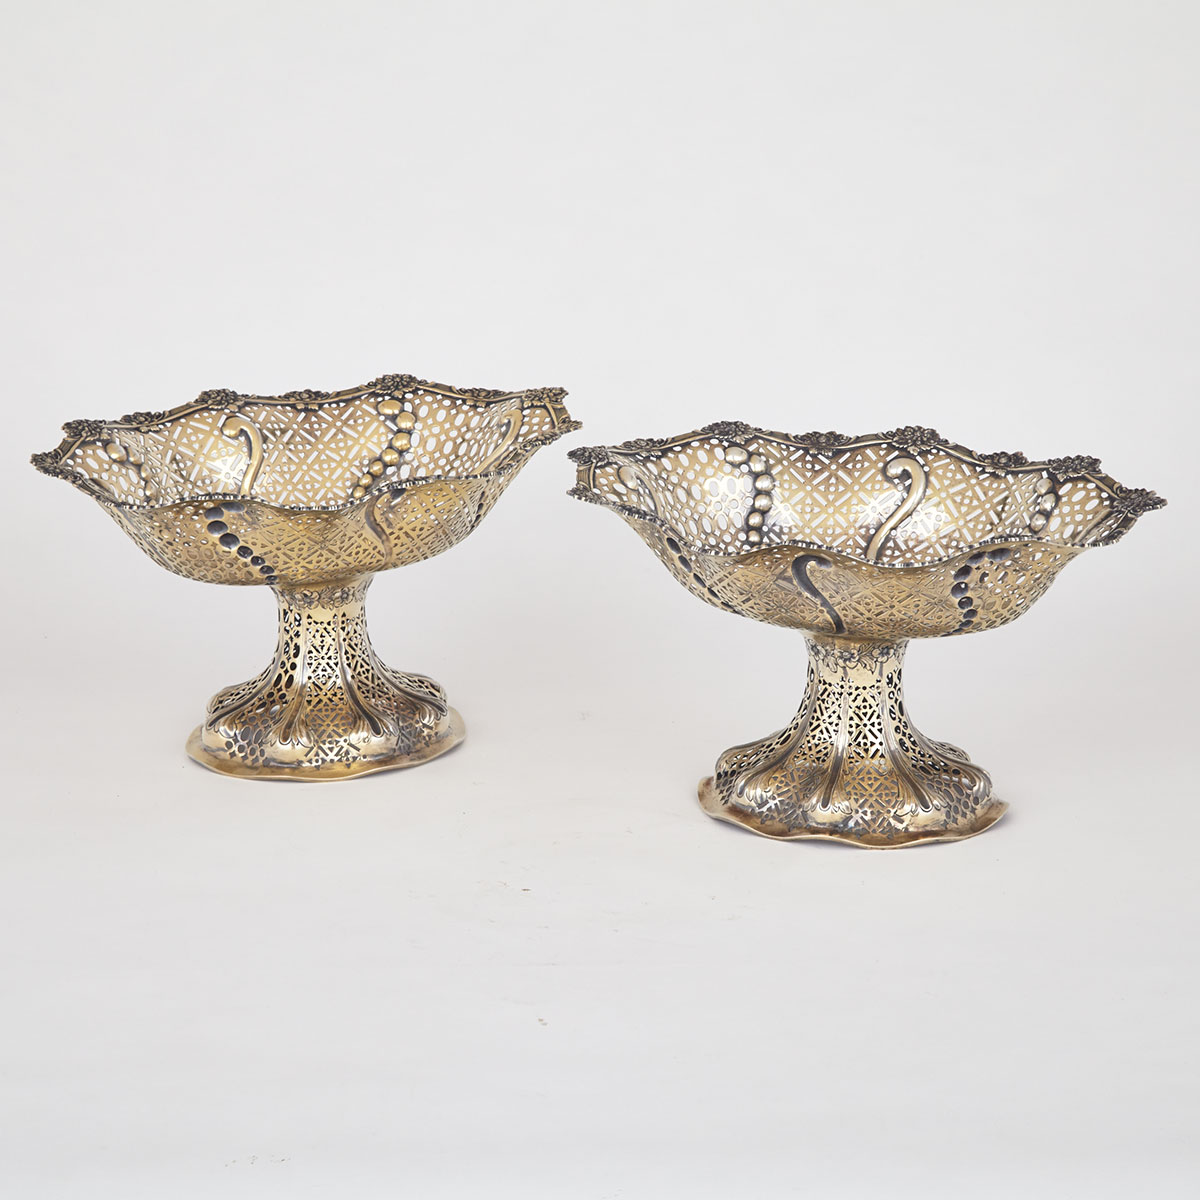 Pair of Victorian Silver-Gilt Pierced Oval Footed Comports, Robert Harper, London, 1876